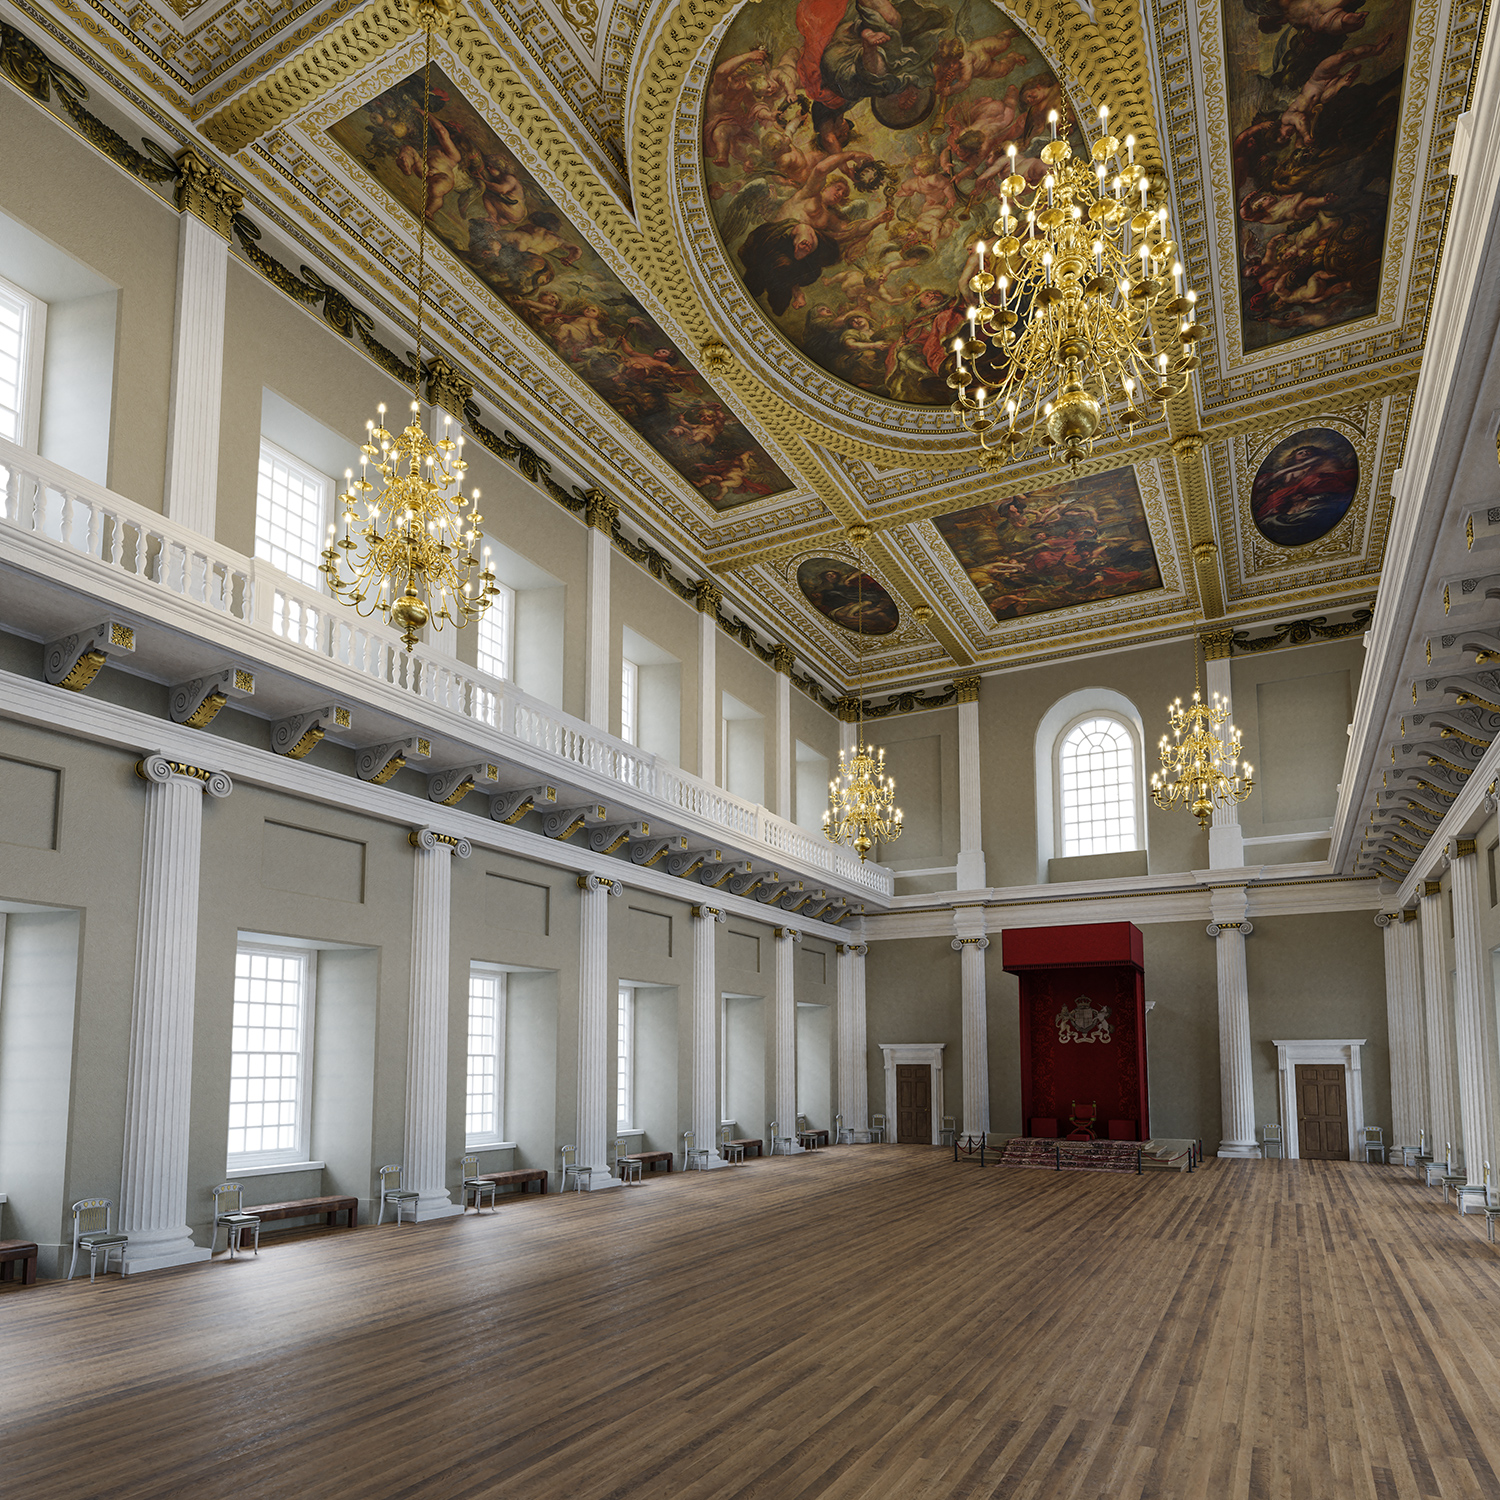 The Surrealist Ball, Banqueting House, Whitehall, London, UK